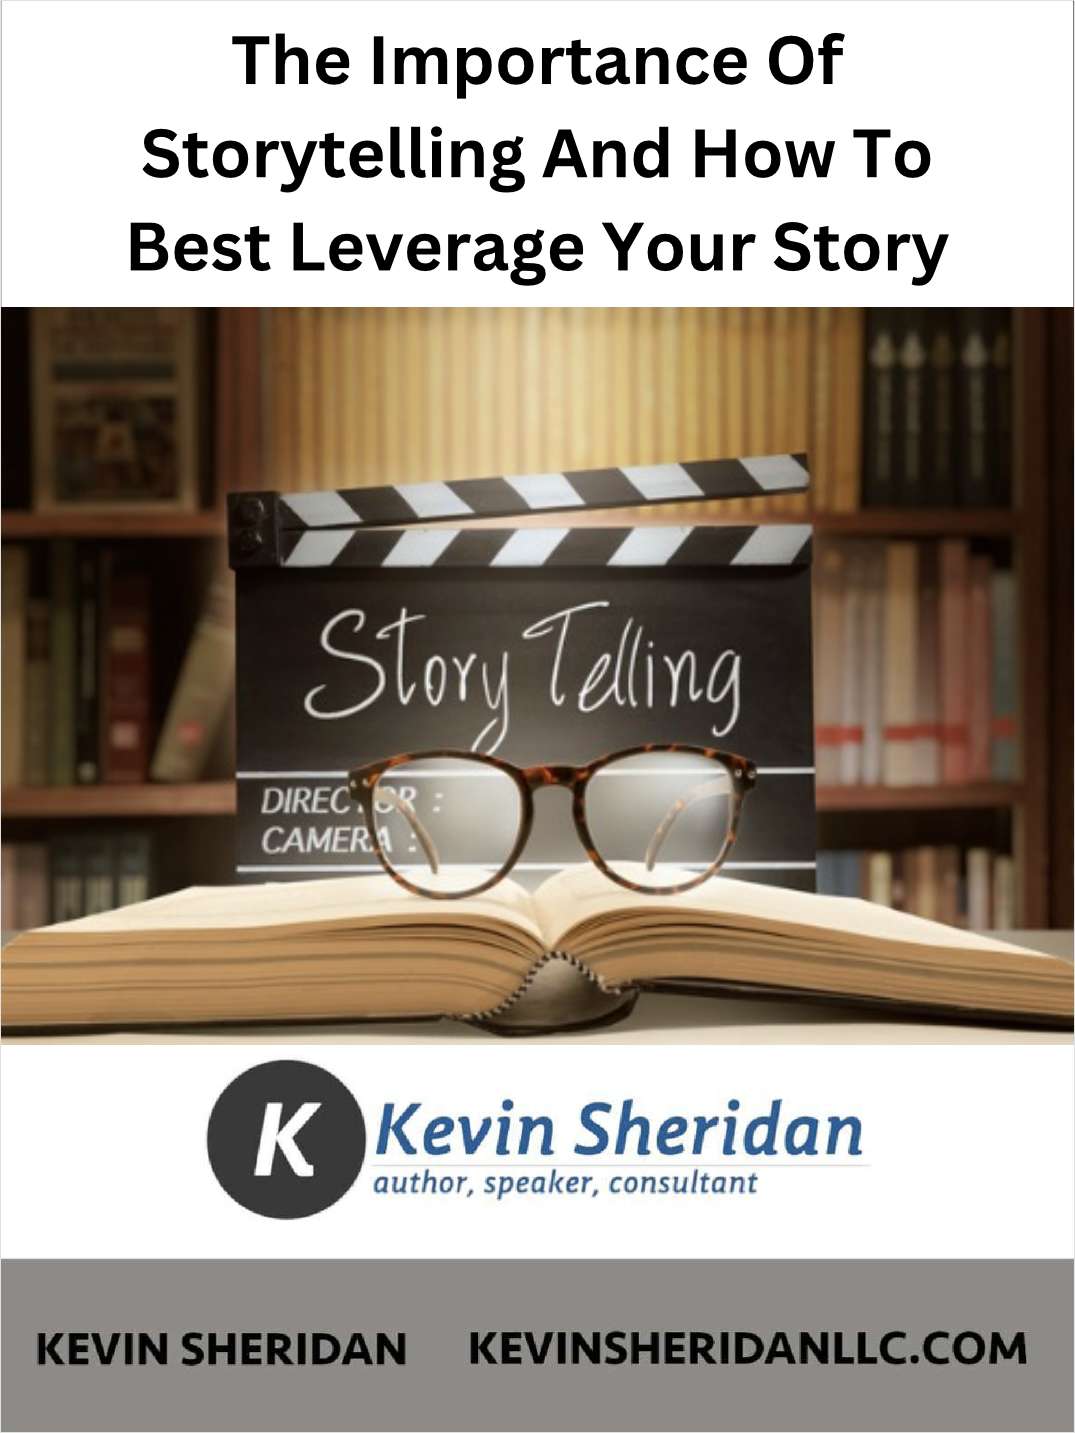 The Importance of Storytelling And How Best To Leverage Your Story